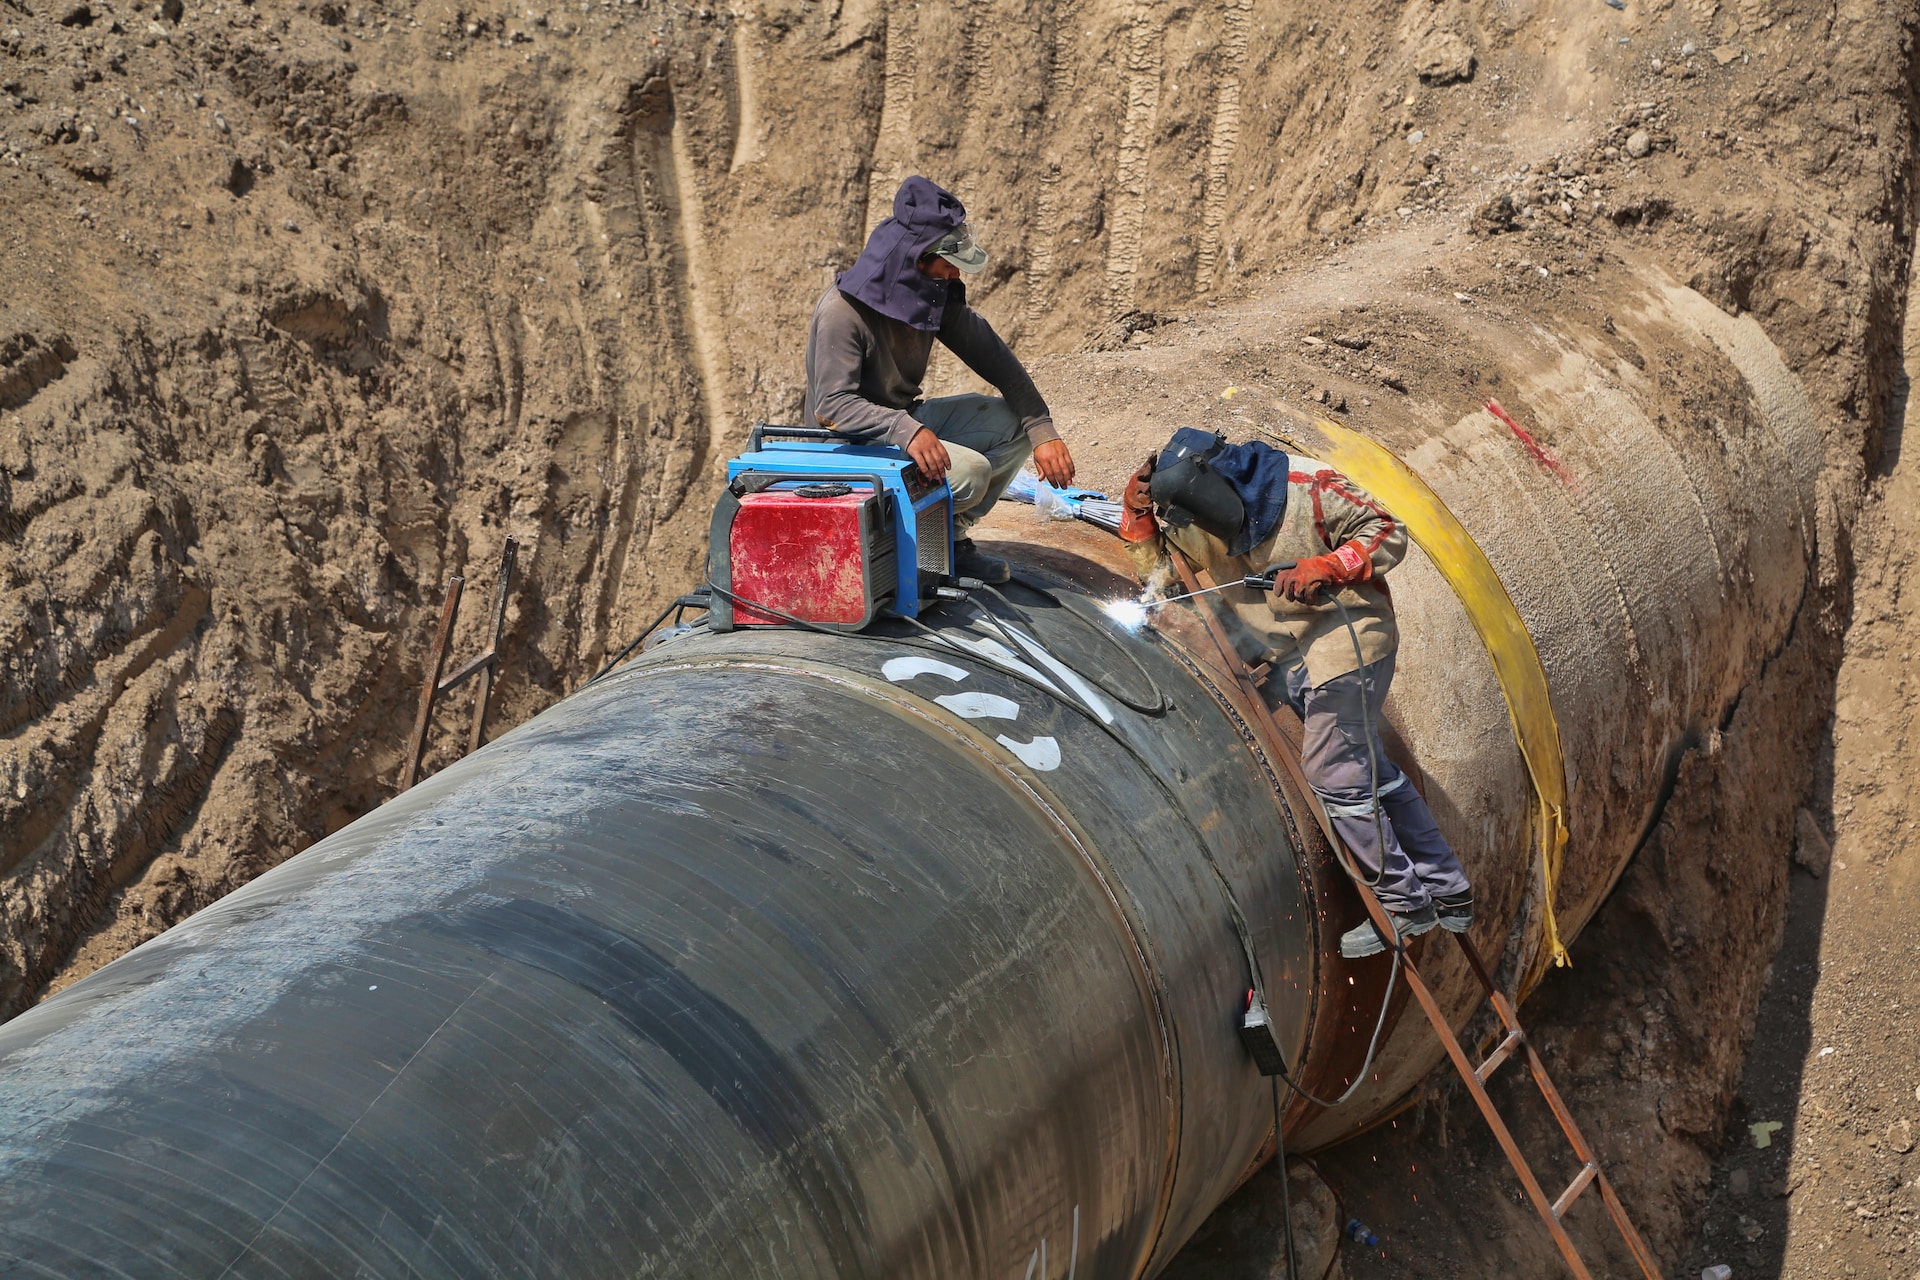 Building the gas pipeline